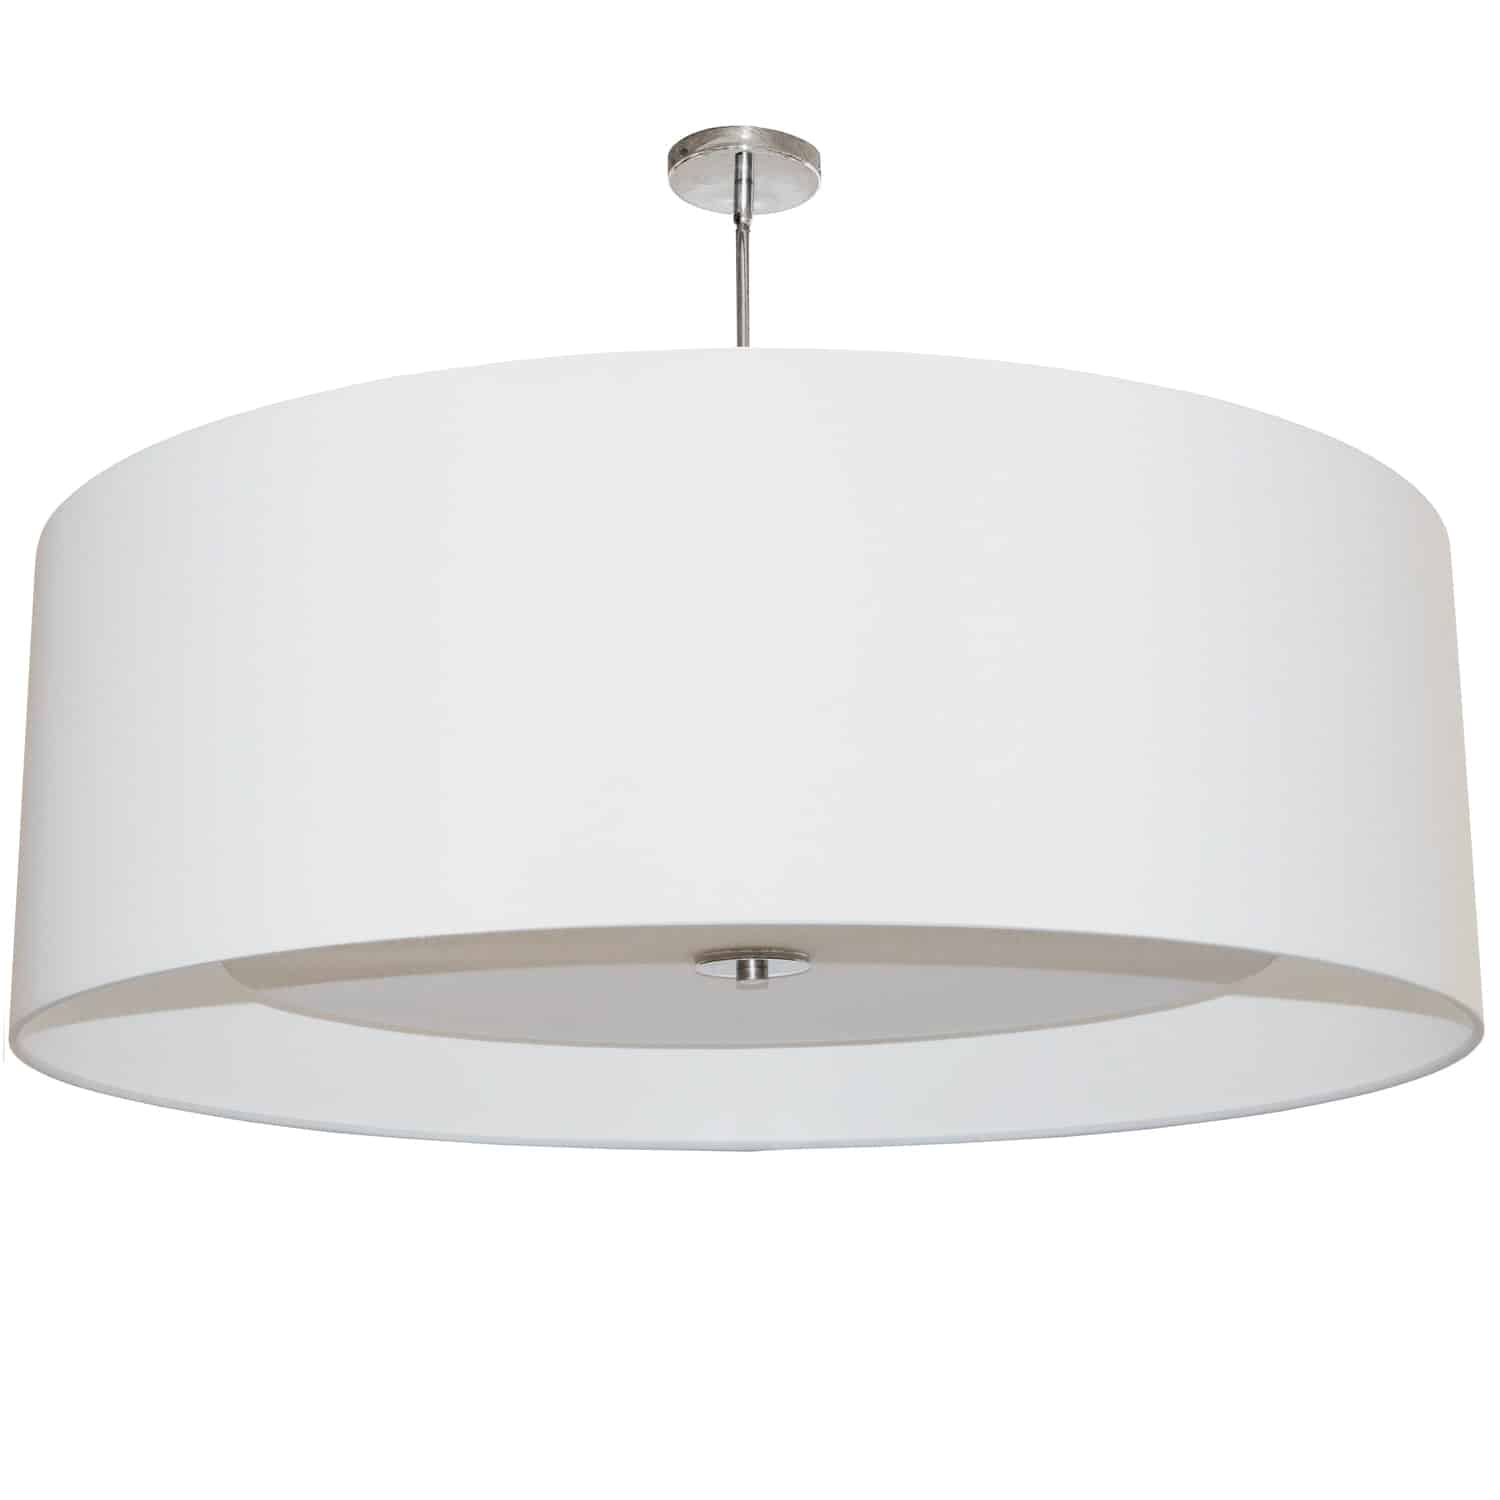 4 Light Helena Pendant Polished Chrome White with White Diffuser 